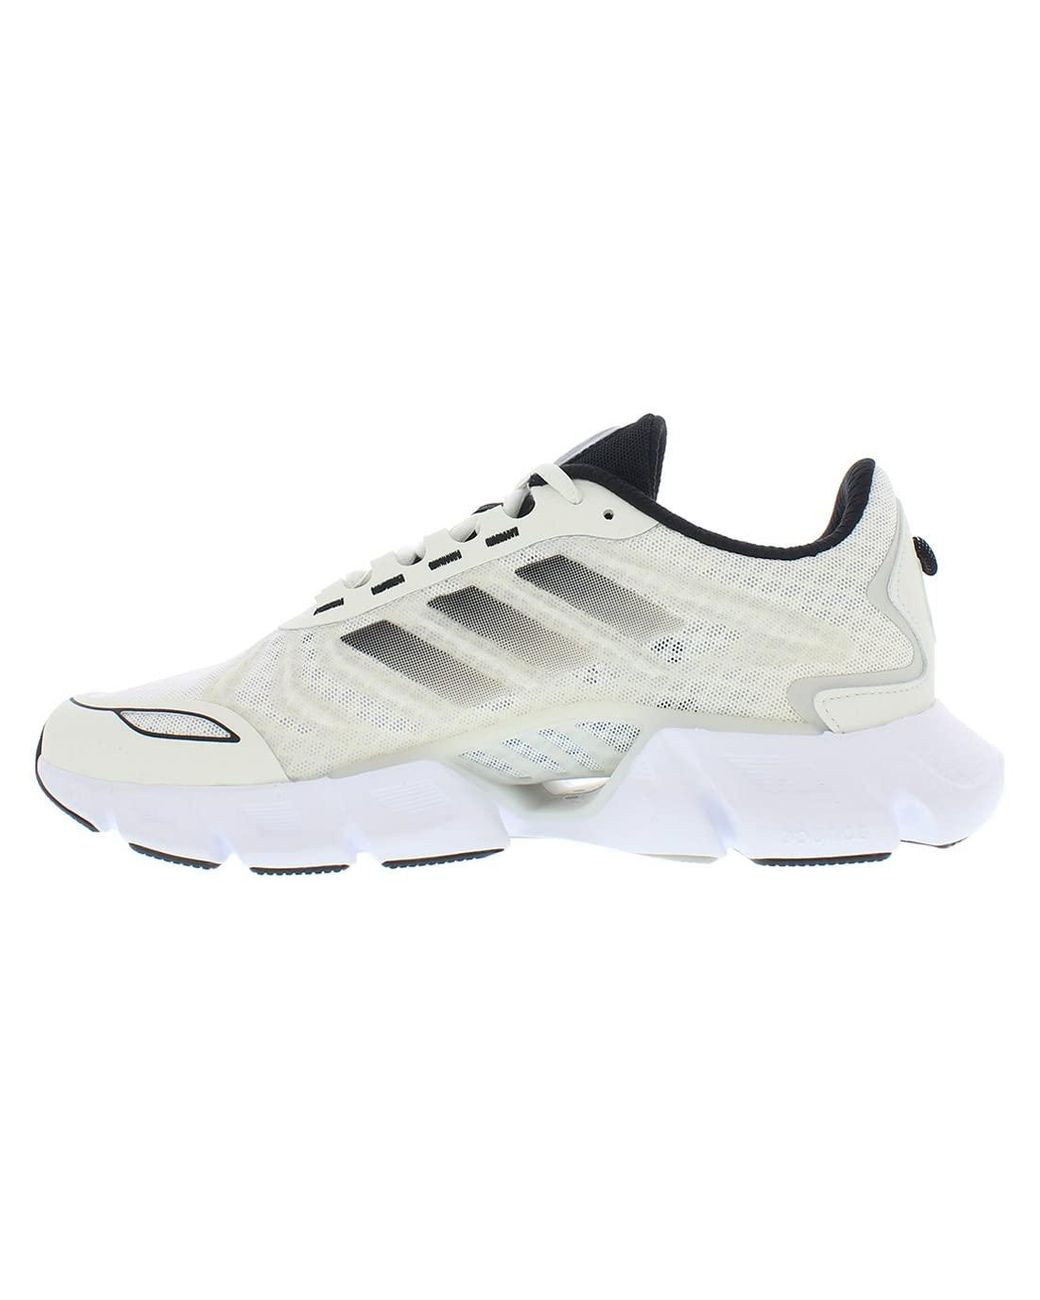 adidas Climacool Running Shoe in White | Lyst